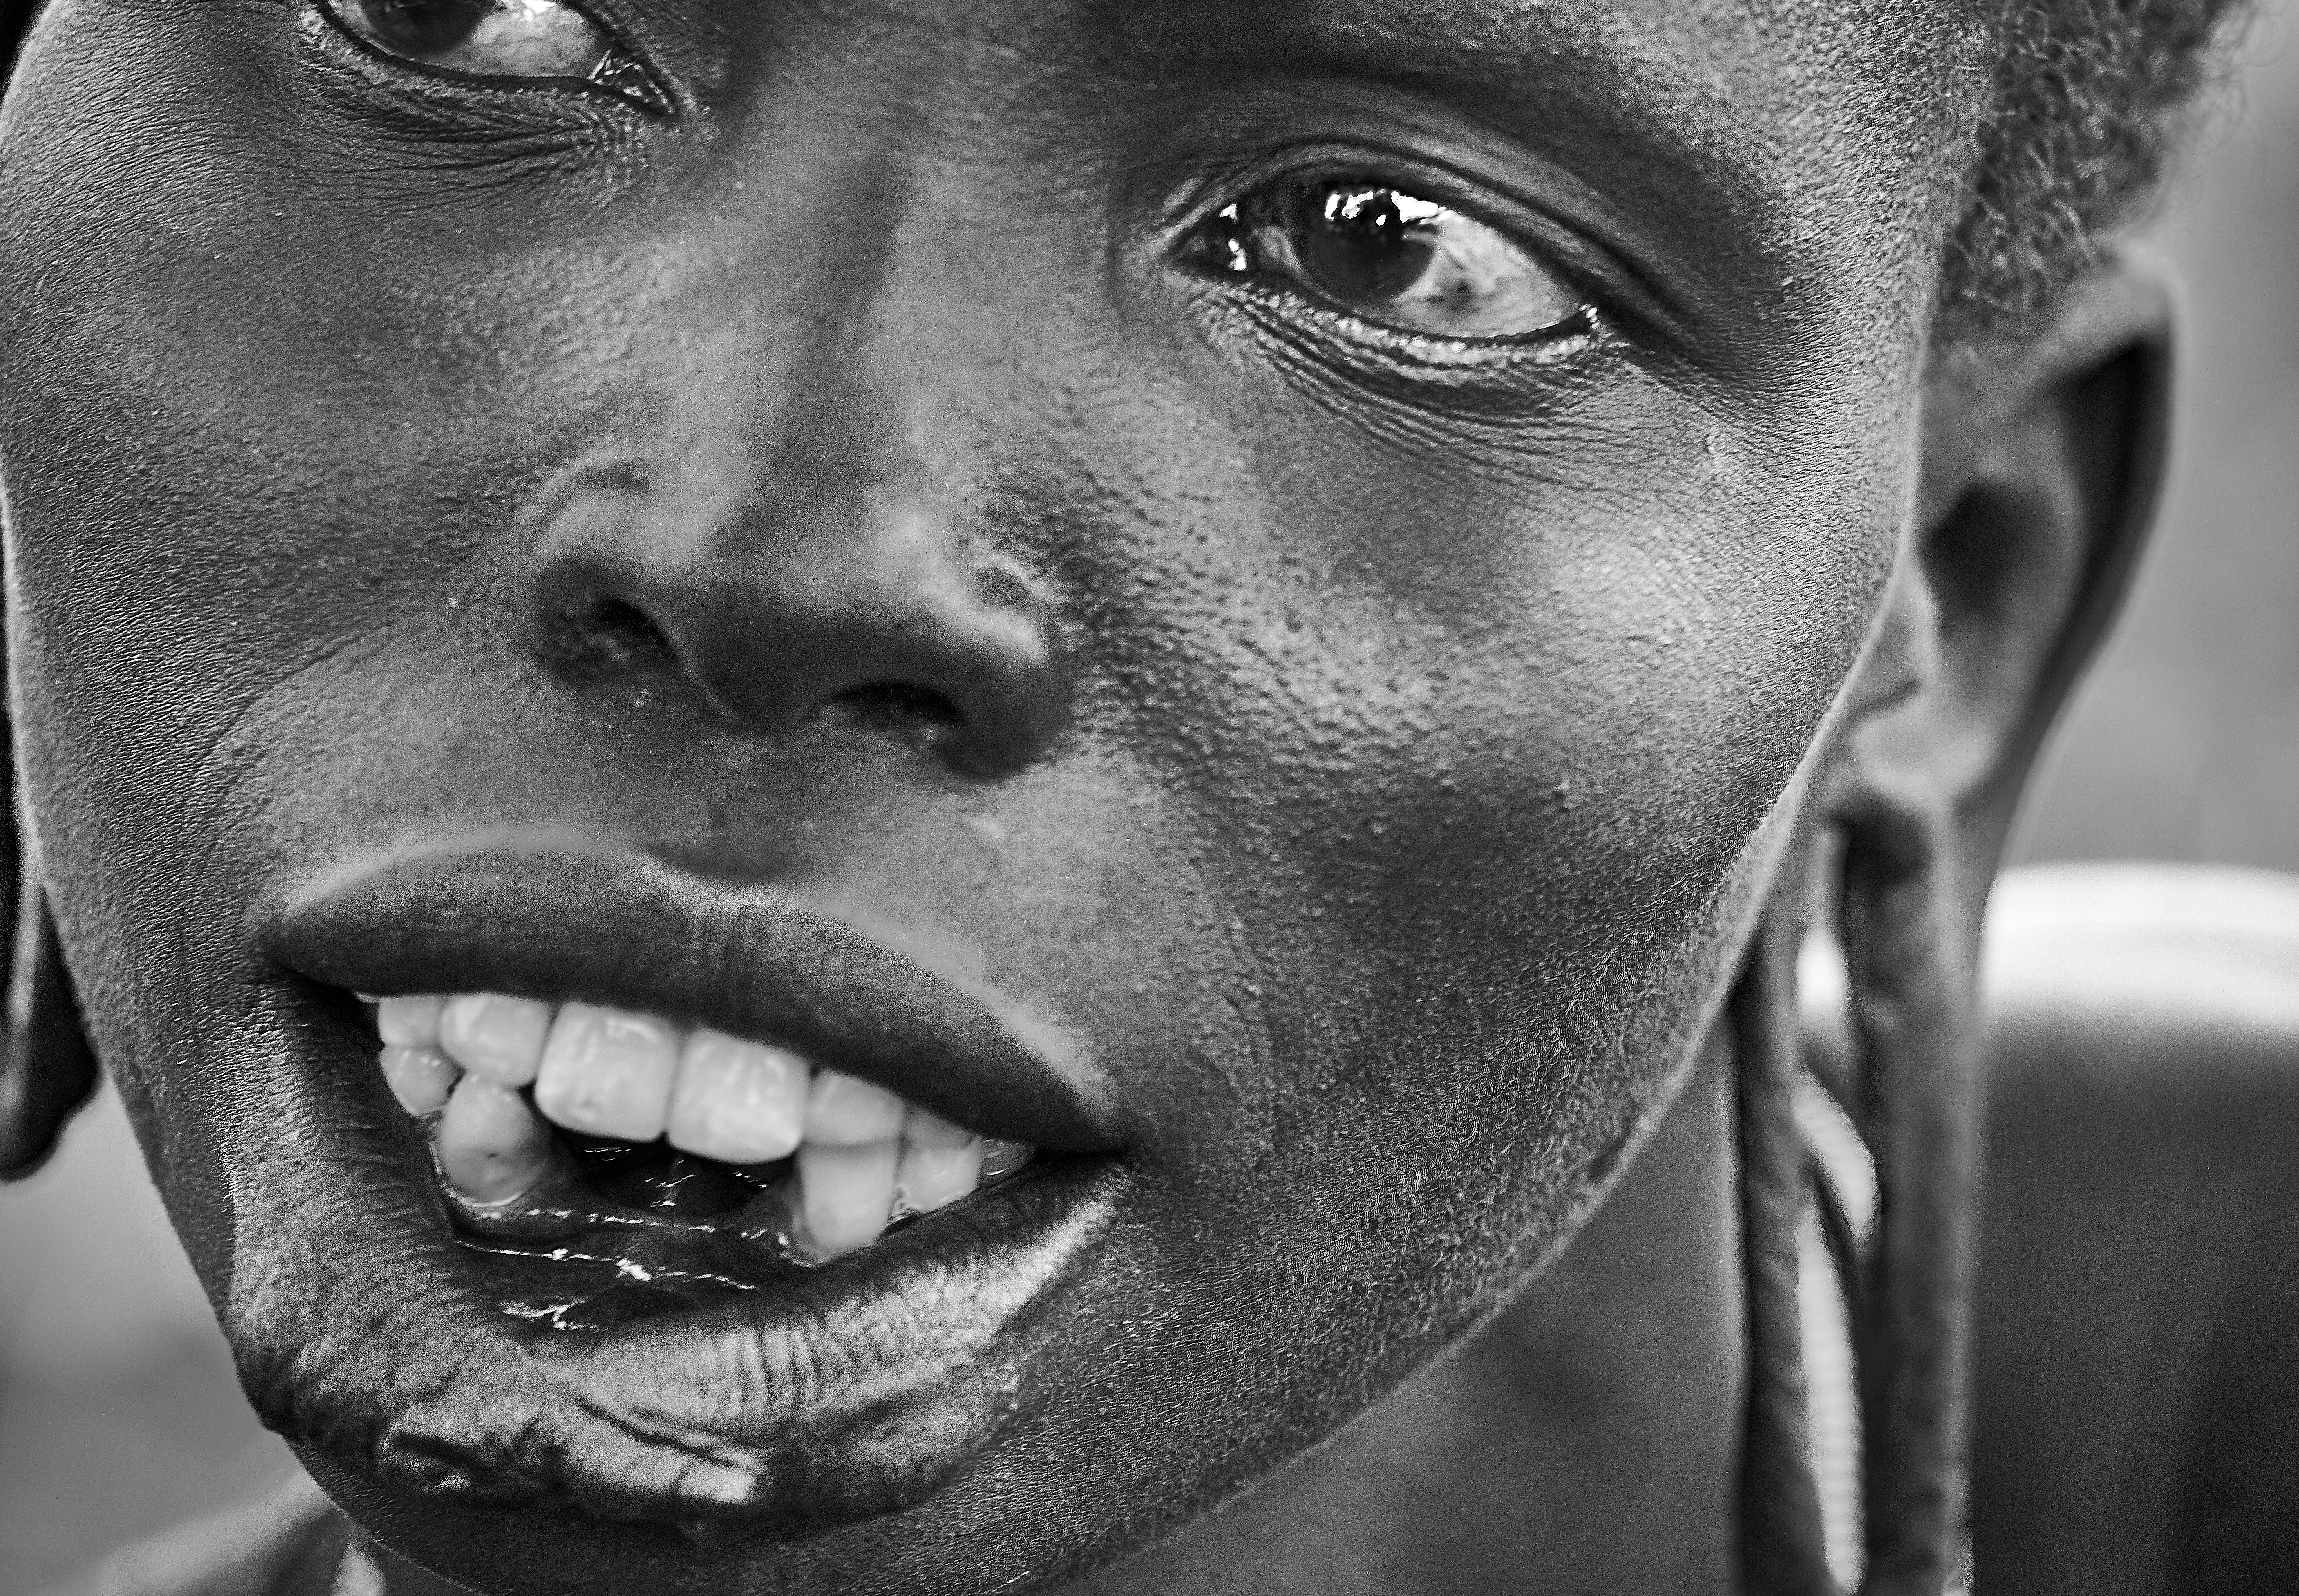 Ladies in the Omo Valley, Ethiopia - The original version without the pruned right eye